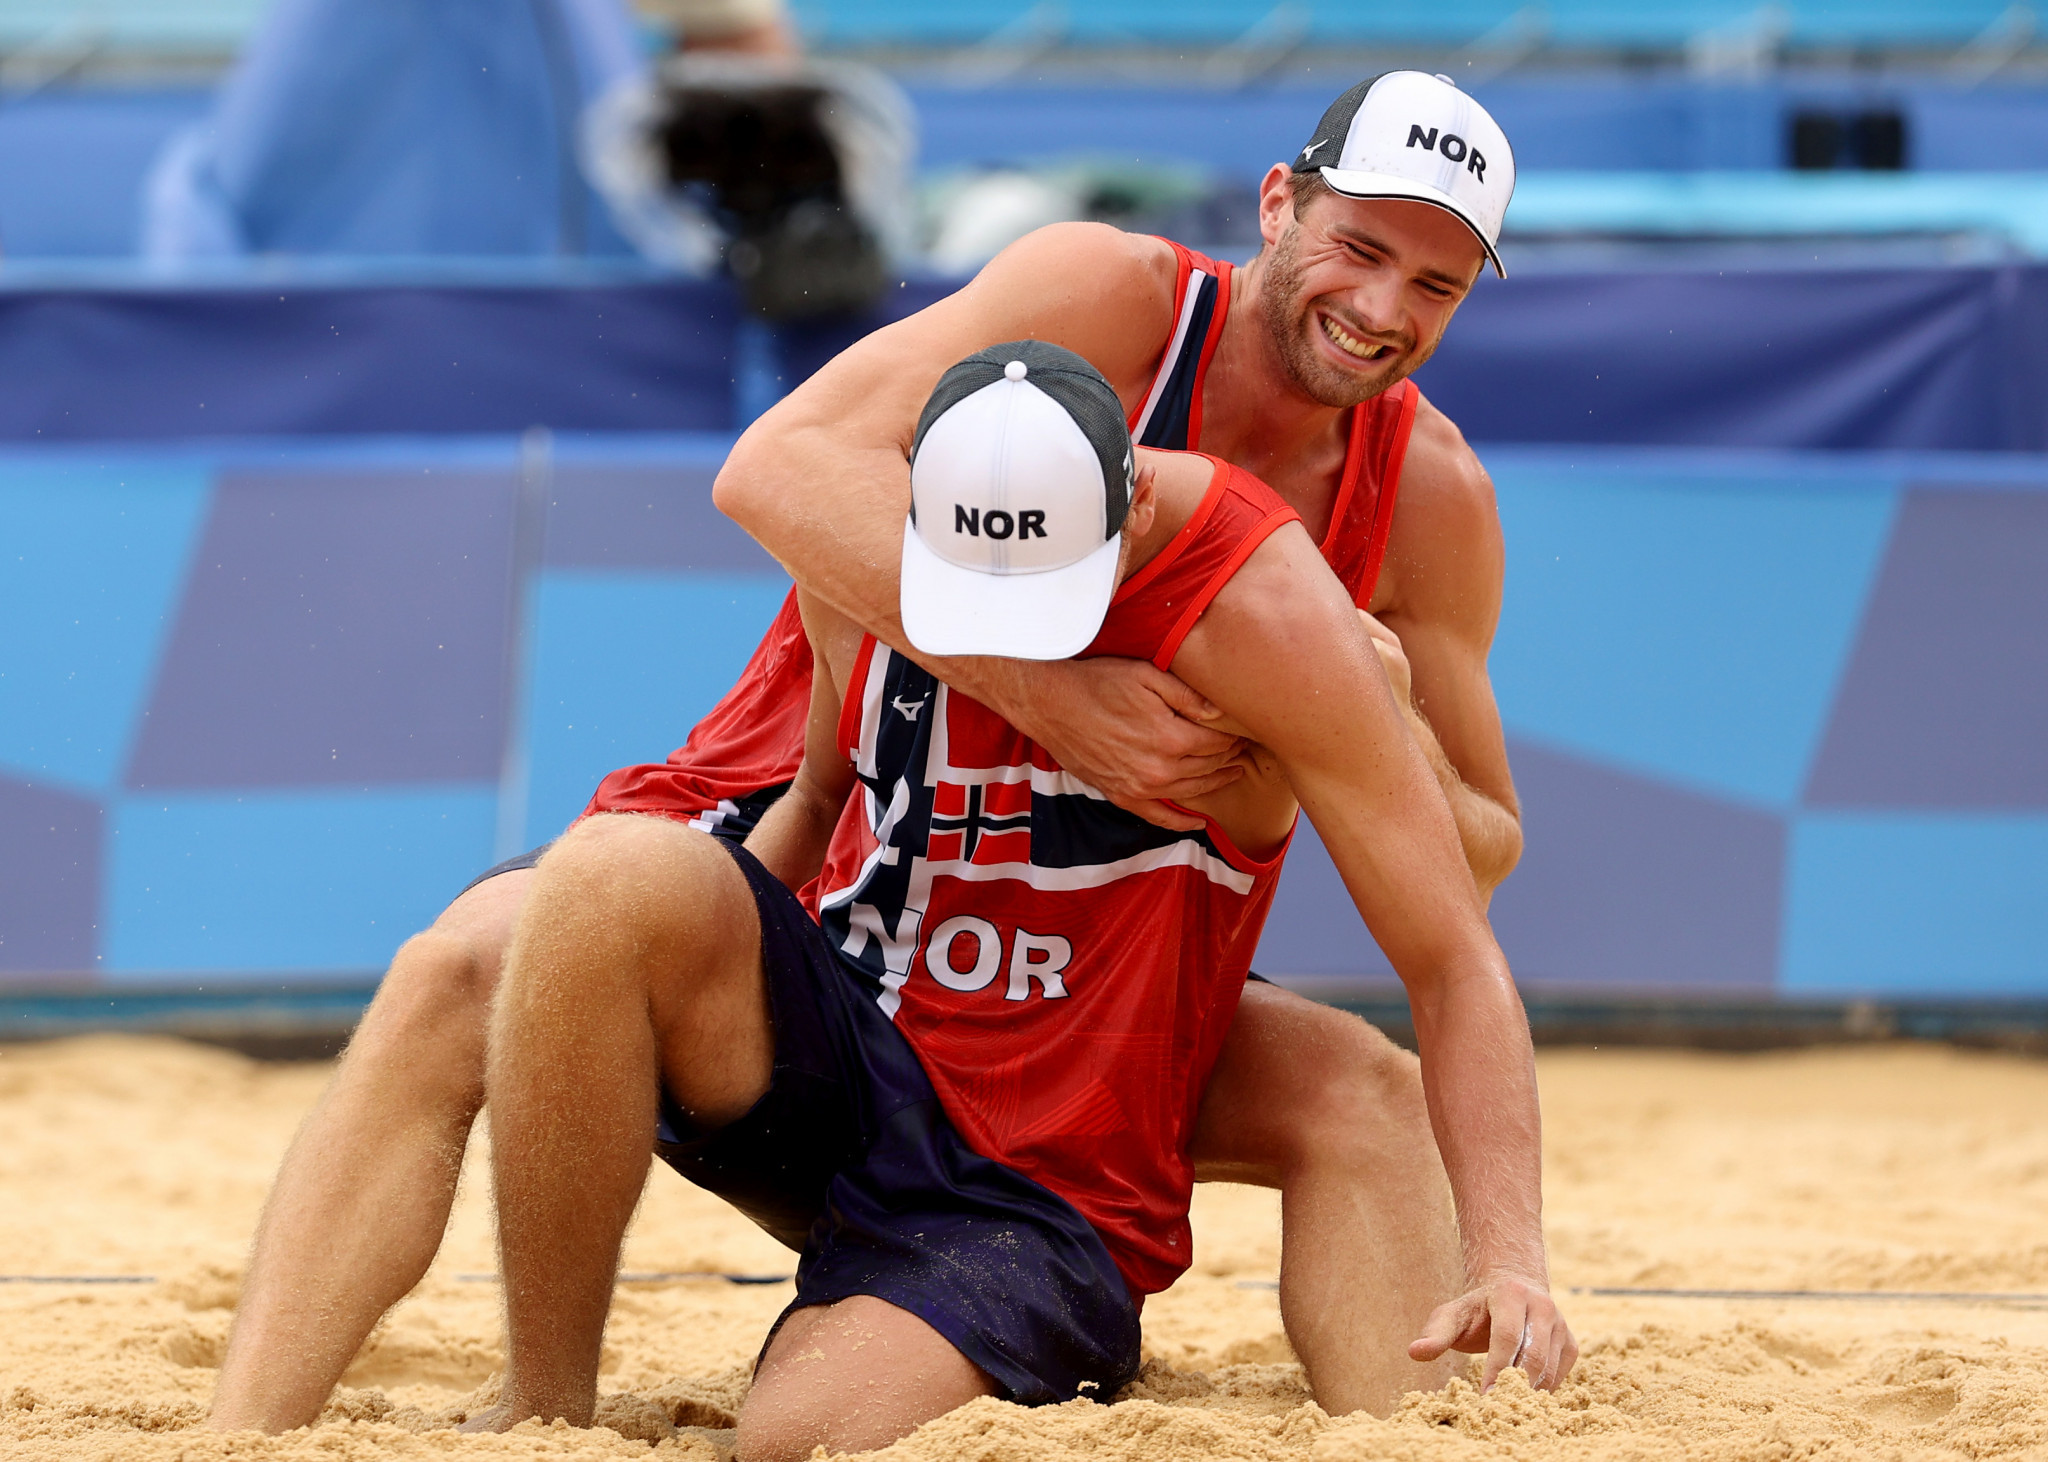 Tokyo 2020 champions Mol and Sørum march into Beach Volleyball World Championships round of 16